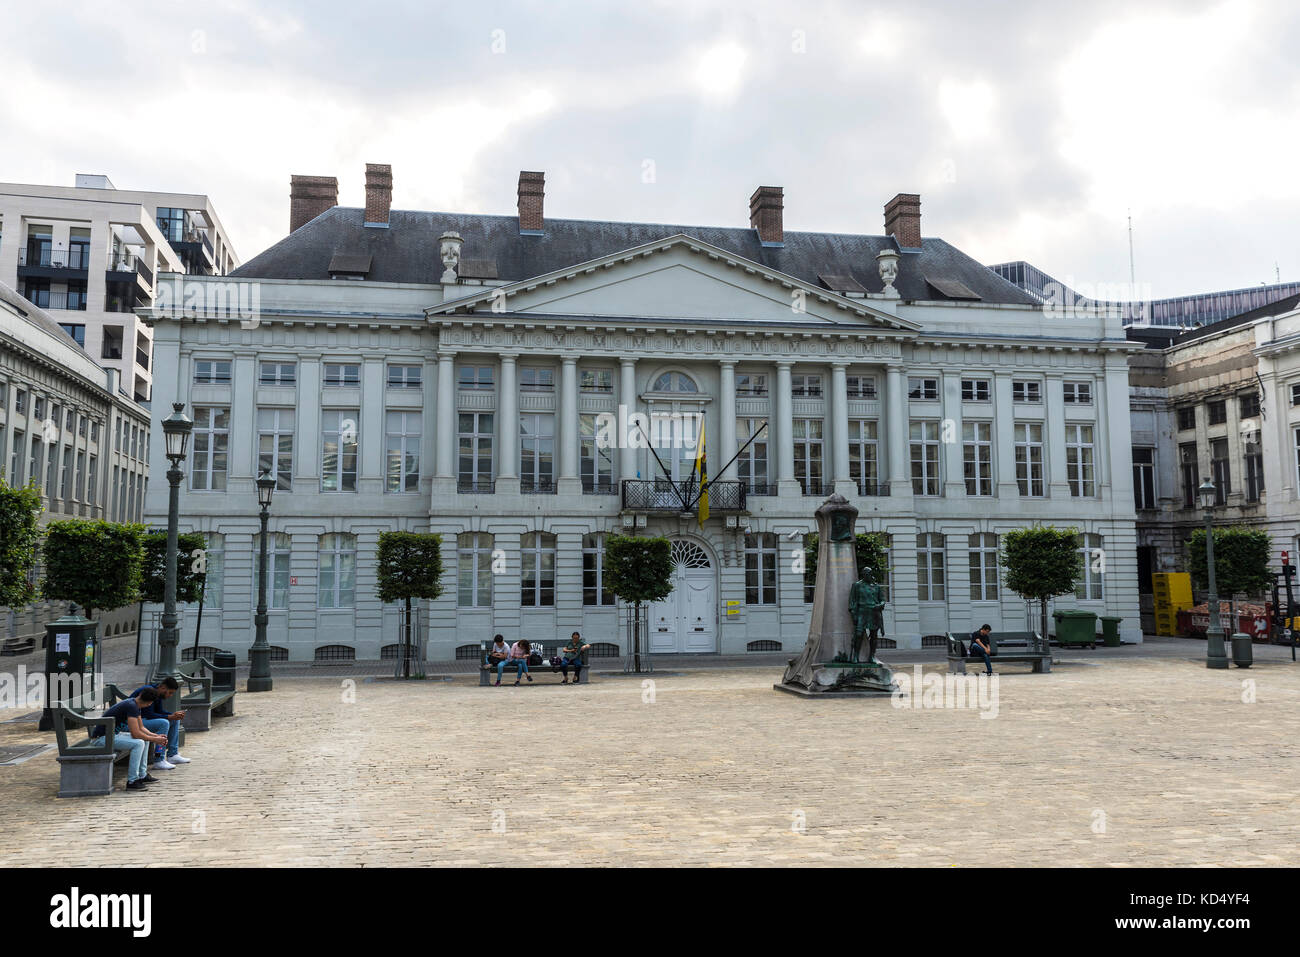 Brussels, Belgium - August 27, 2017: Martyrs Square with people walking around in Brussels, Belgium. Monument dedicated to te martyrs of the 1830 revo Stock Photo